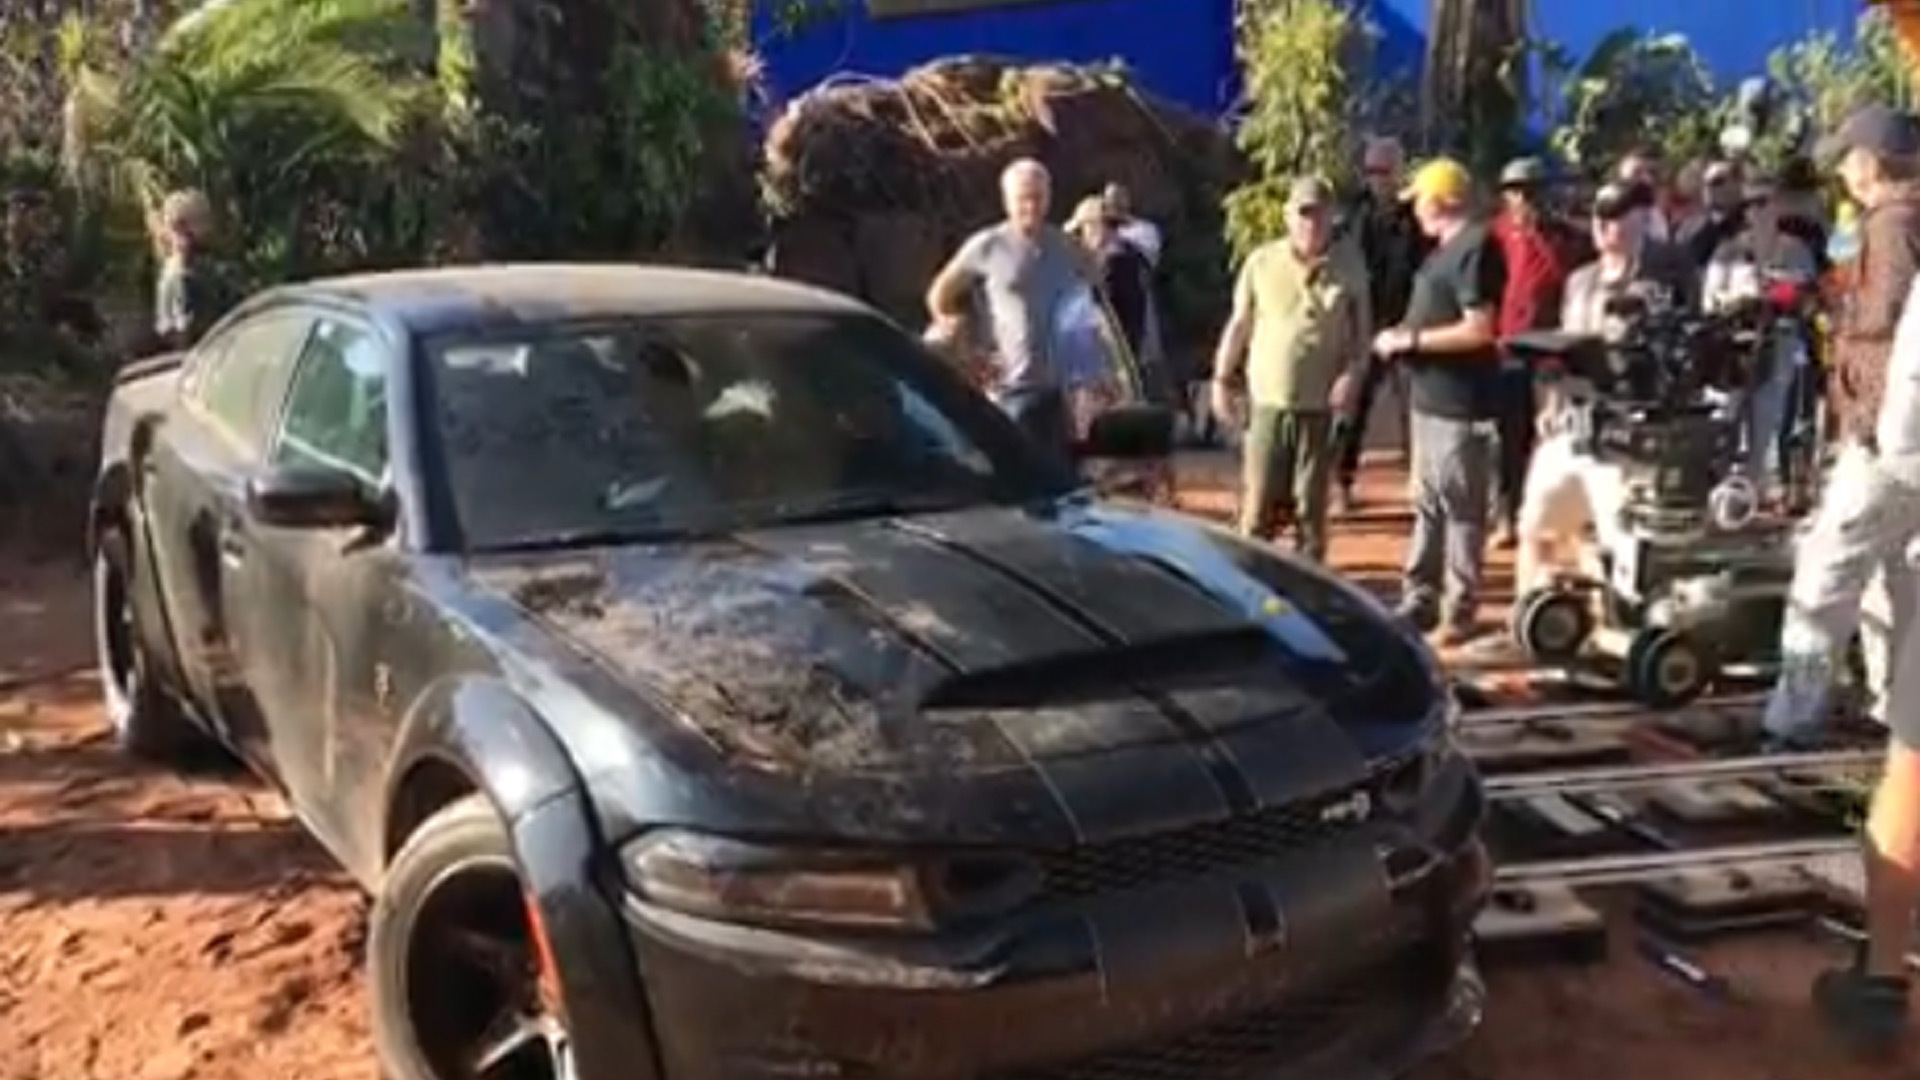 2020 Dodge Charger Widebody on the set of “Fast & Furious 9”